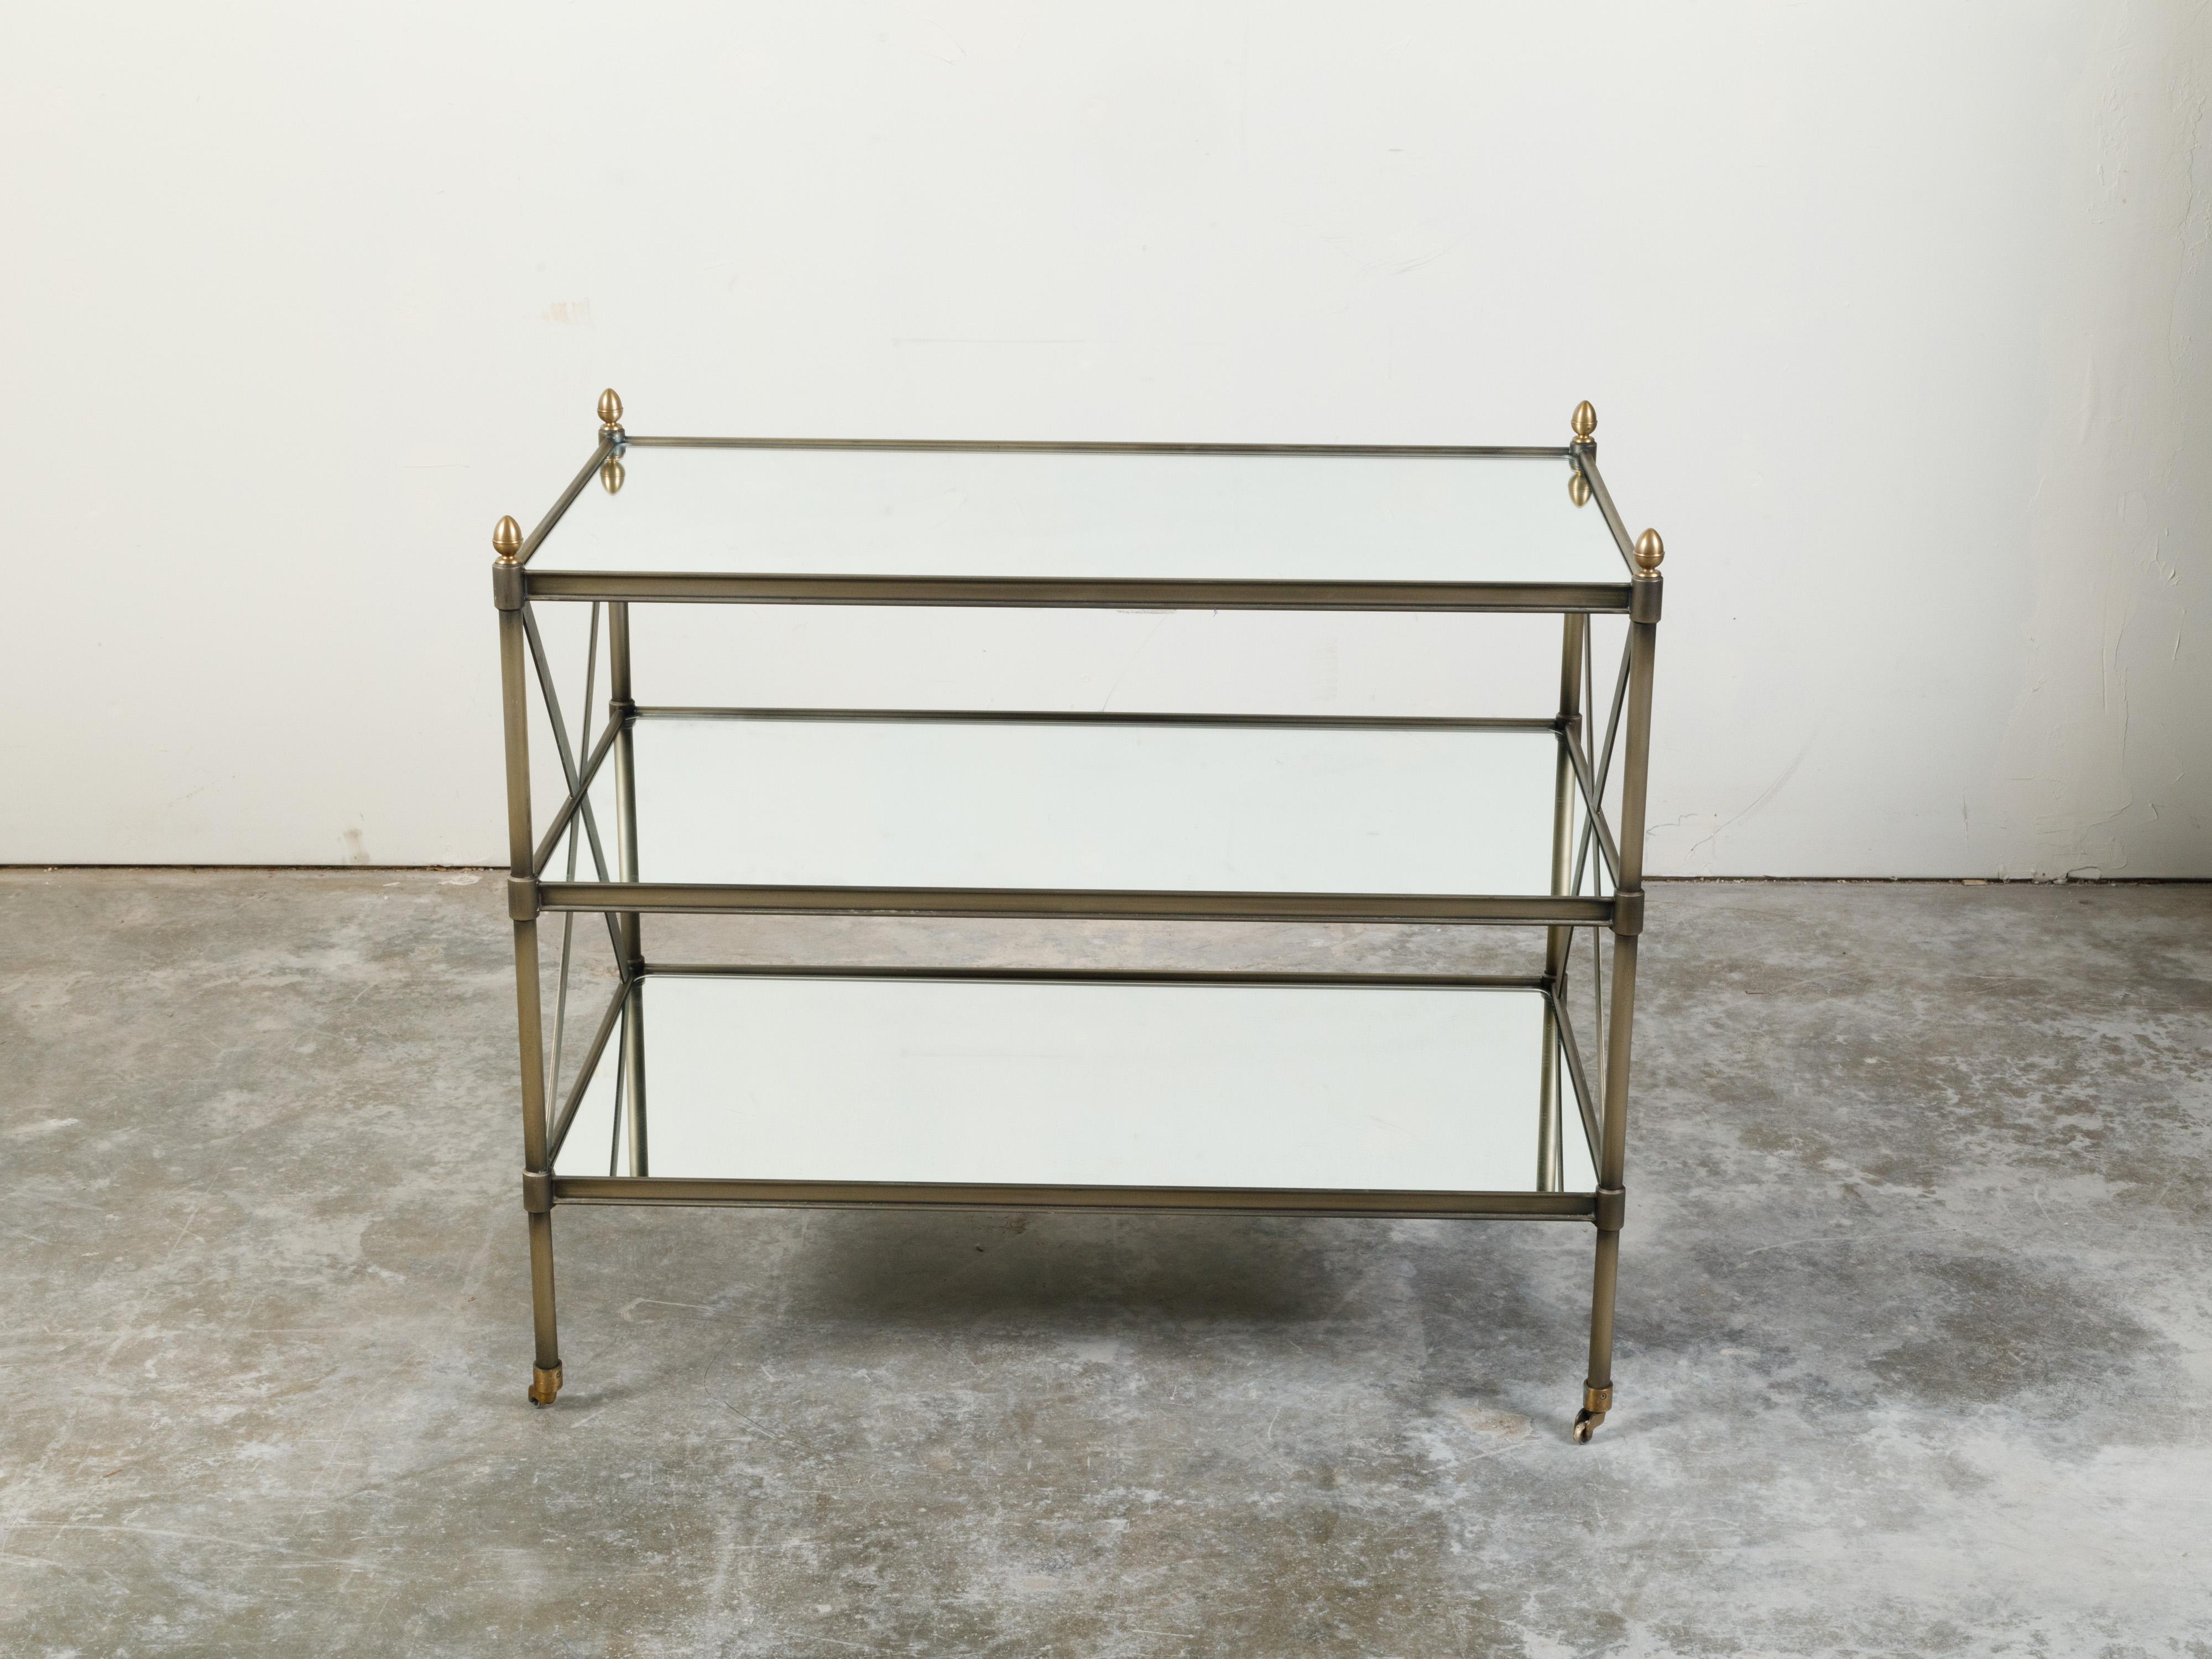 Italian Midcentury Patinated Metal Trolley with Mirrored Shelves and Casters For Sale 1